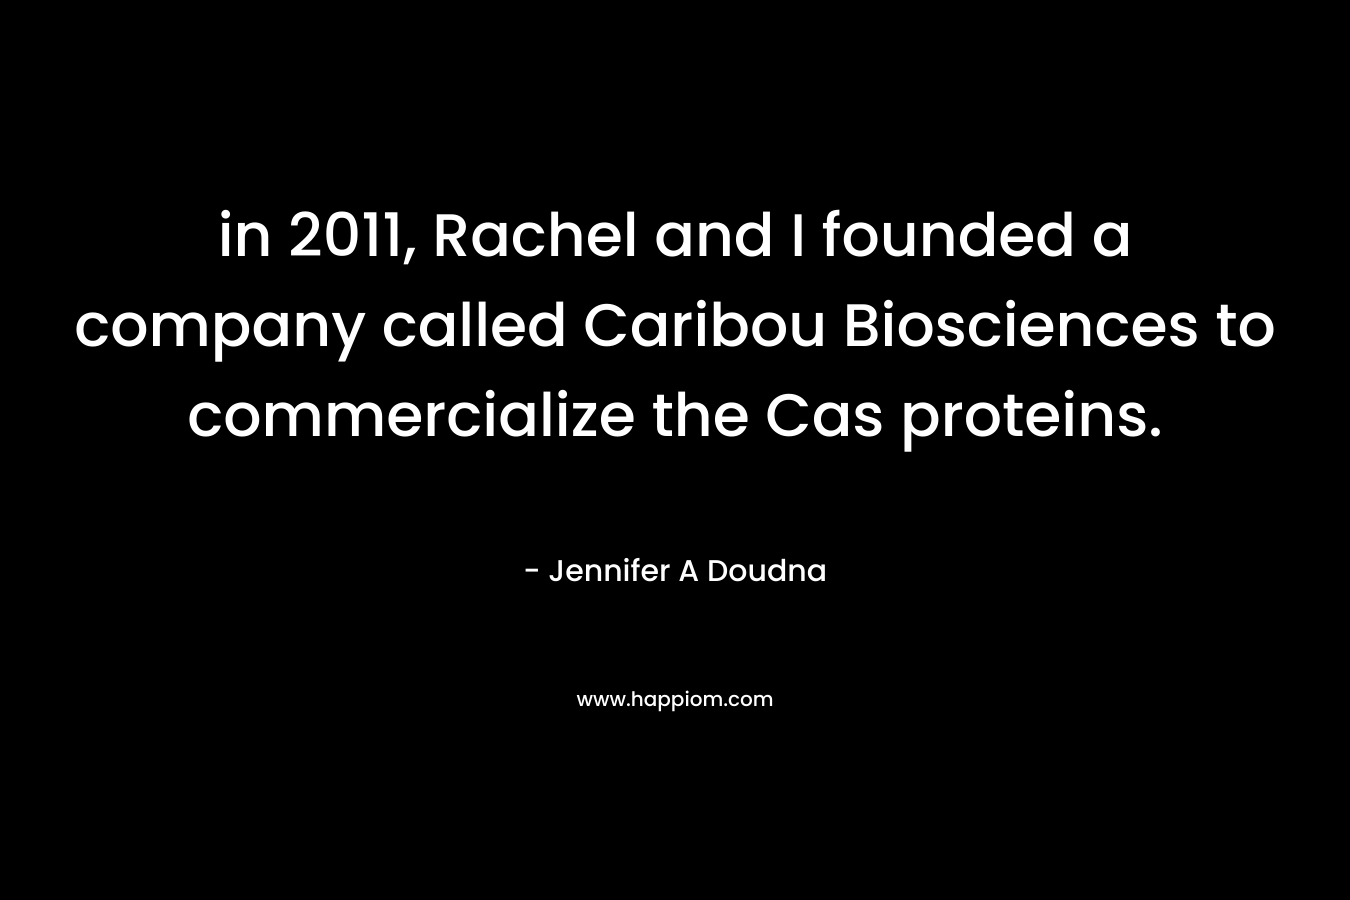 in 2011, Rachel and I founded a company called Caribou Biosciences to commercialize the Cas proteins.